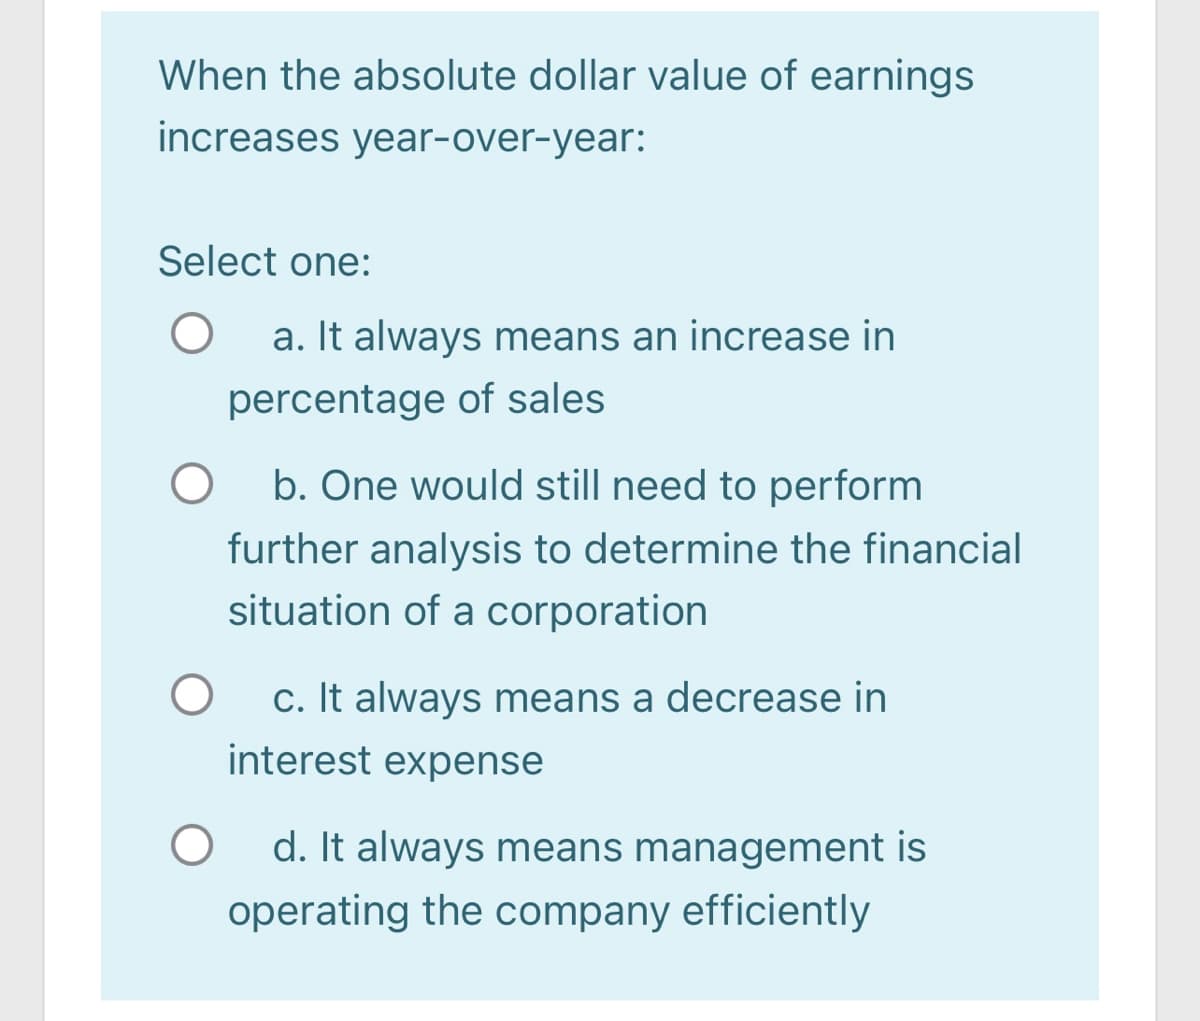 When the absolute dollar value of earnings
increases year-over-year:
Select one:
a. It always means an increase in
percentage of sales
b. One would still need to perform
further analysis to determine the financial
situation of a corporation
c. It always means a decrease in
interest expense
d. It always means management is
operating the company efficiently
